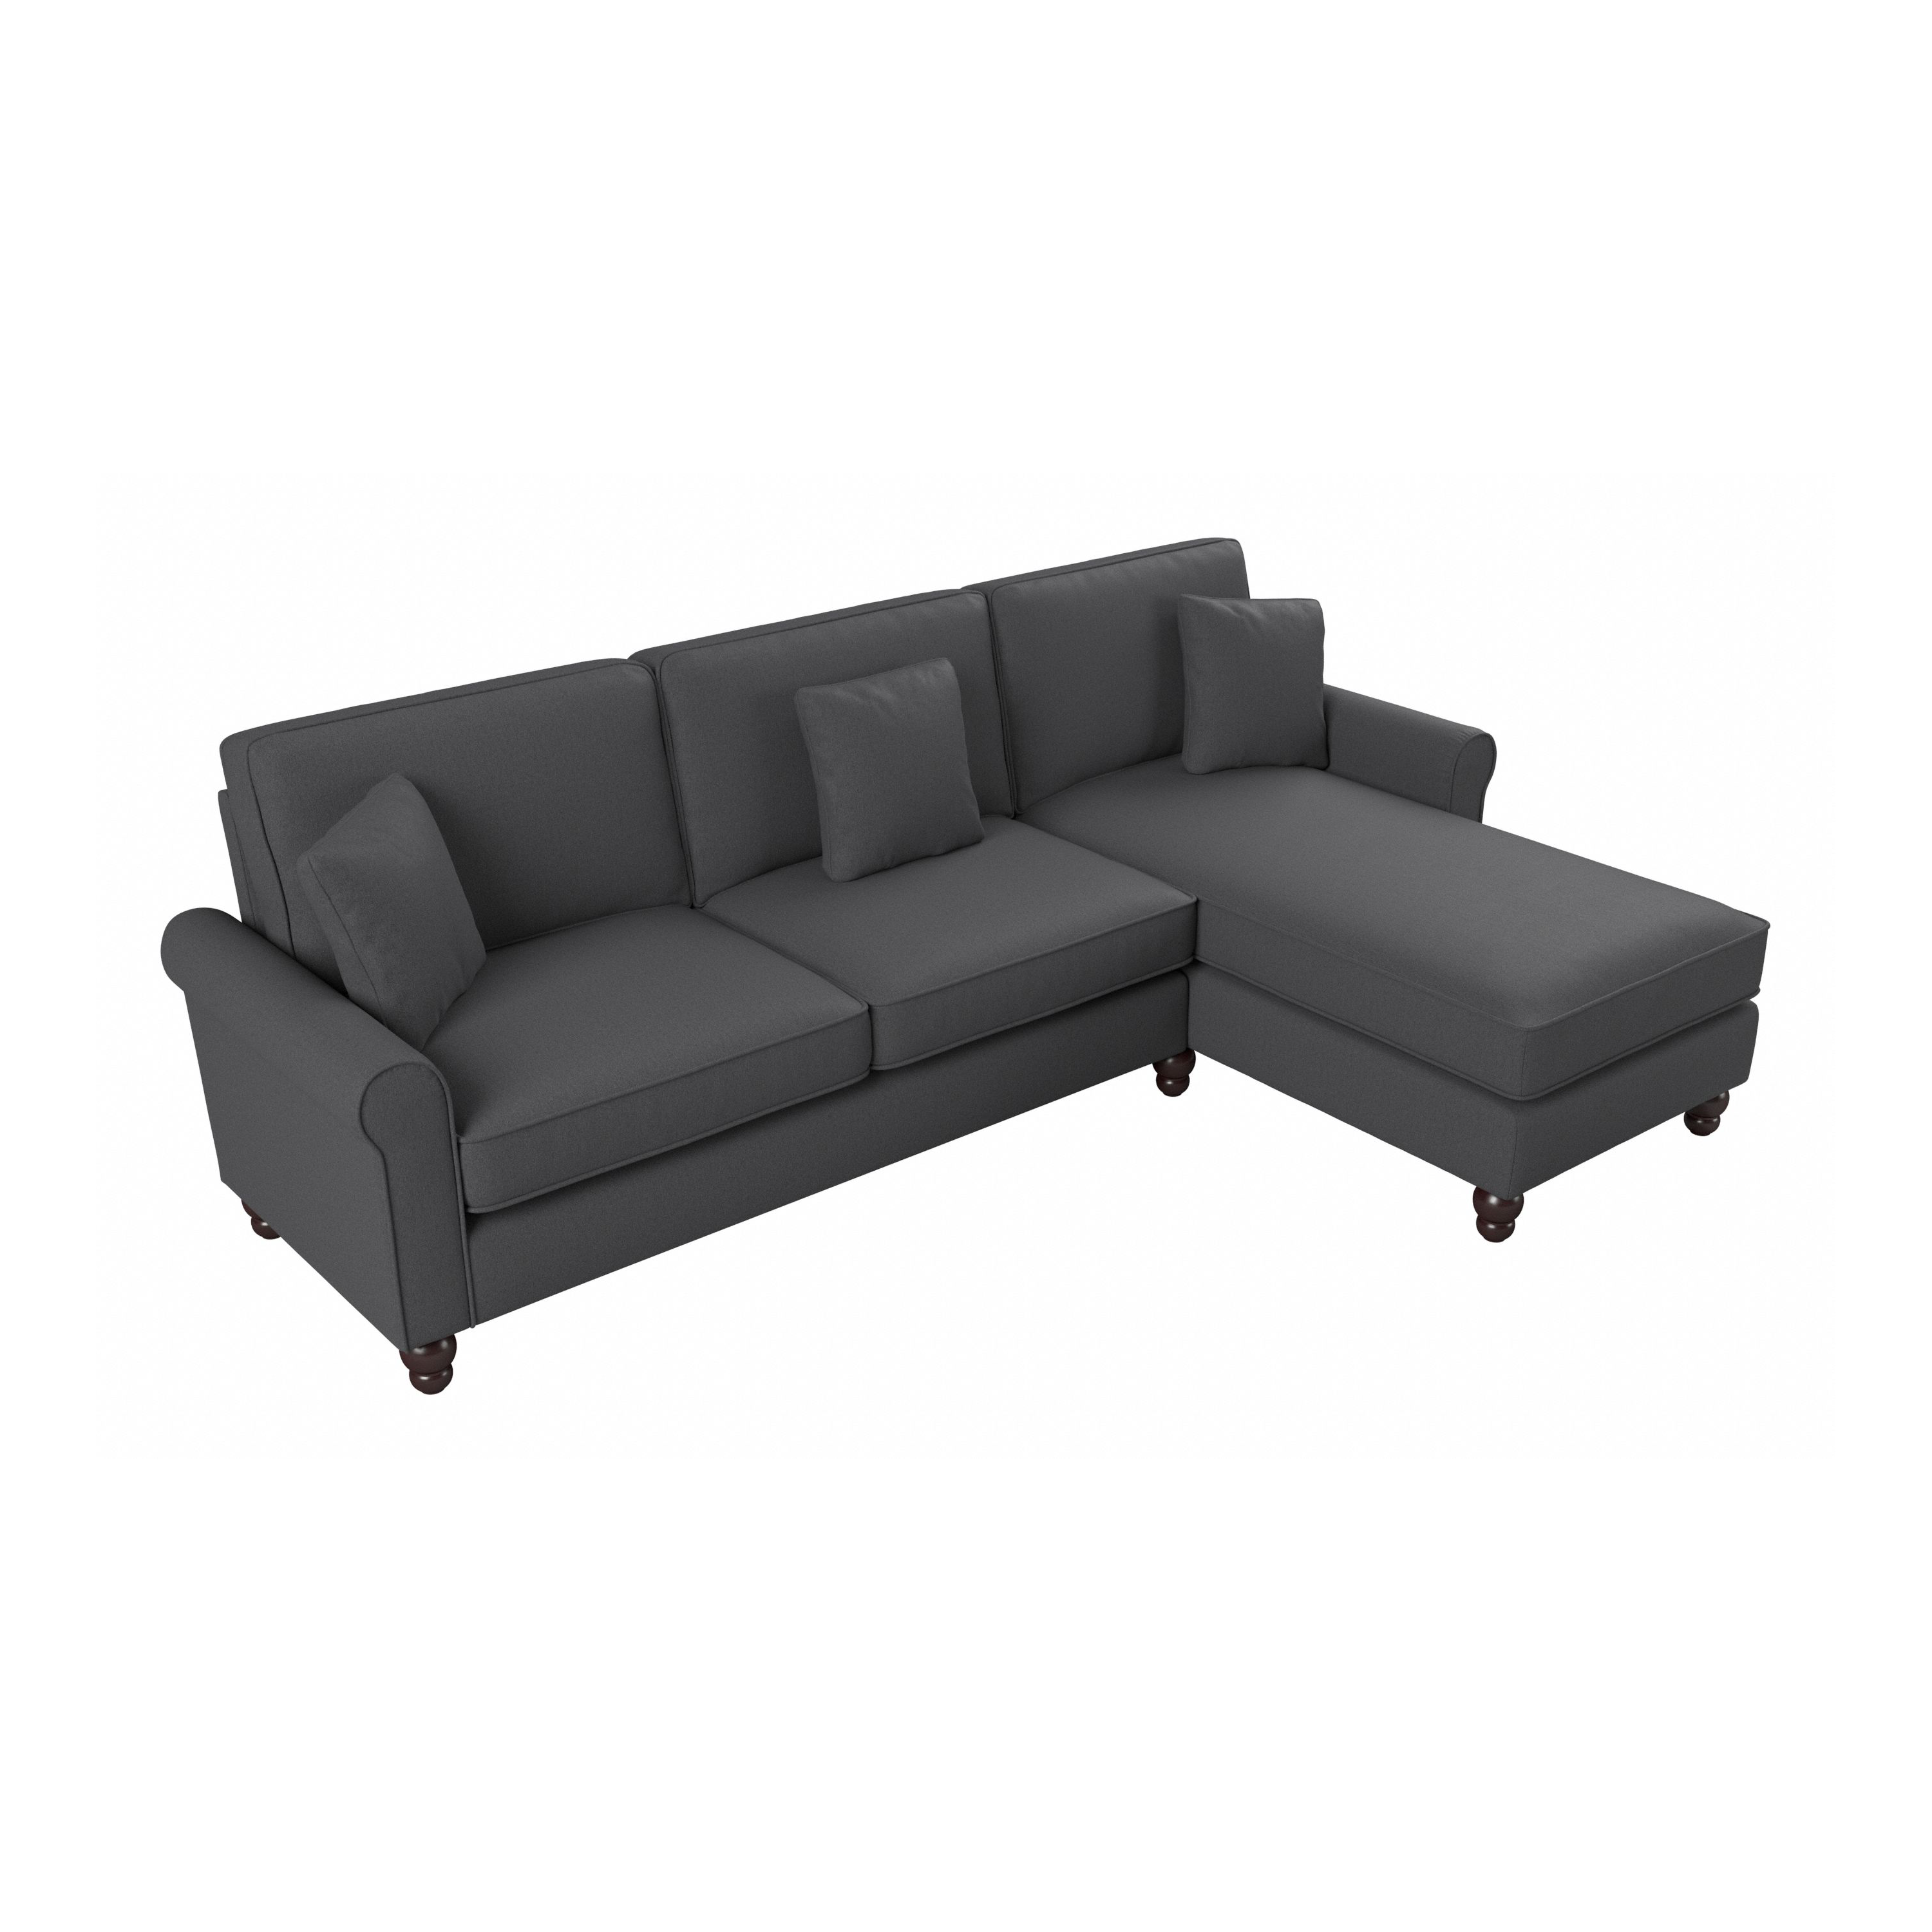 Shop Bush Furniture Hudson 102W Sectional Couch with Reversible Chaise Lounge 02 HDY102BCGH-03K #color_charcoal gray herringbone fabr